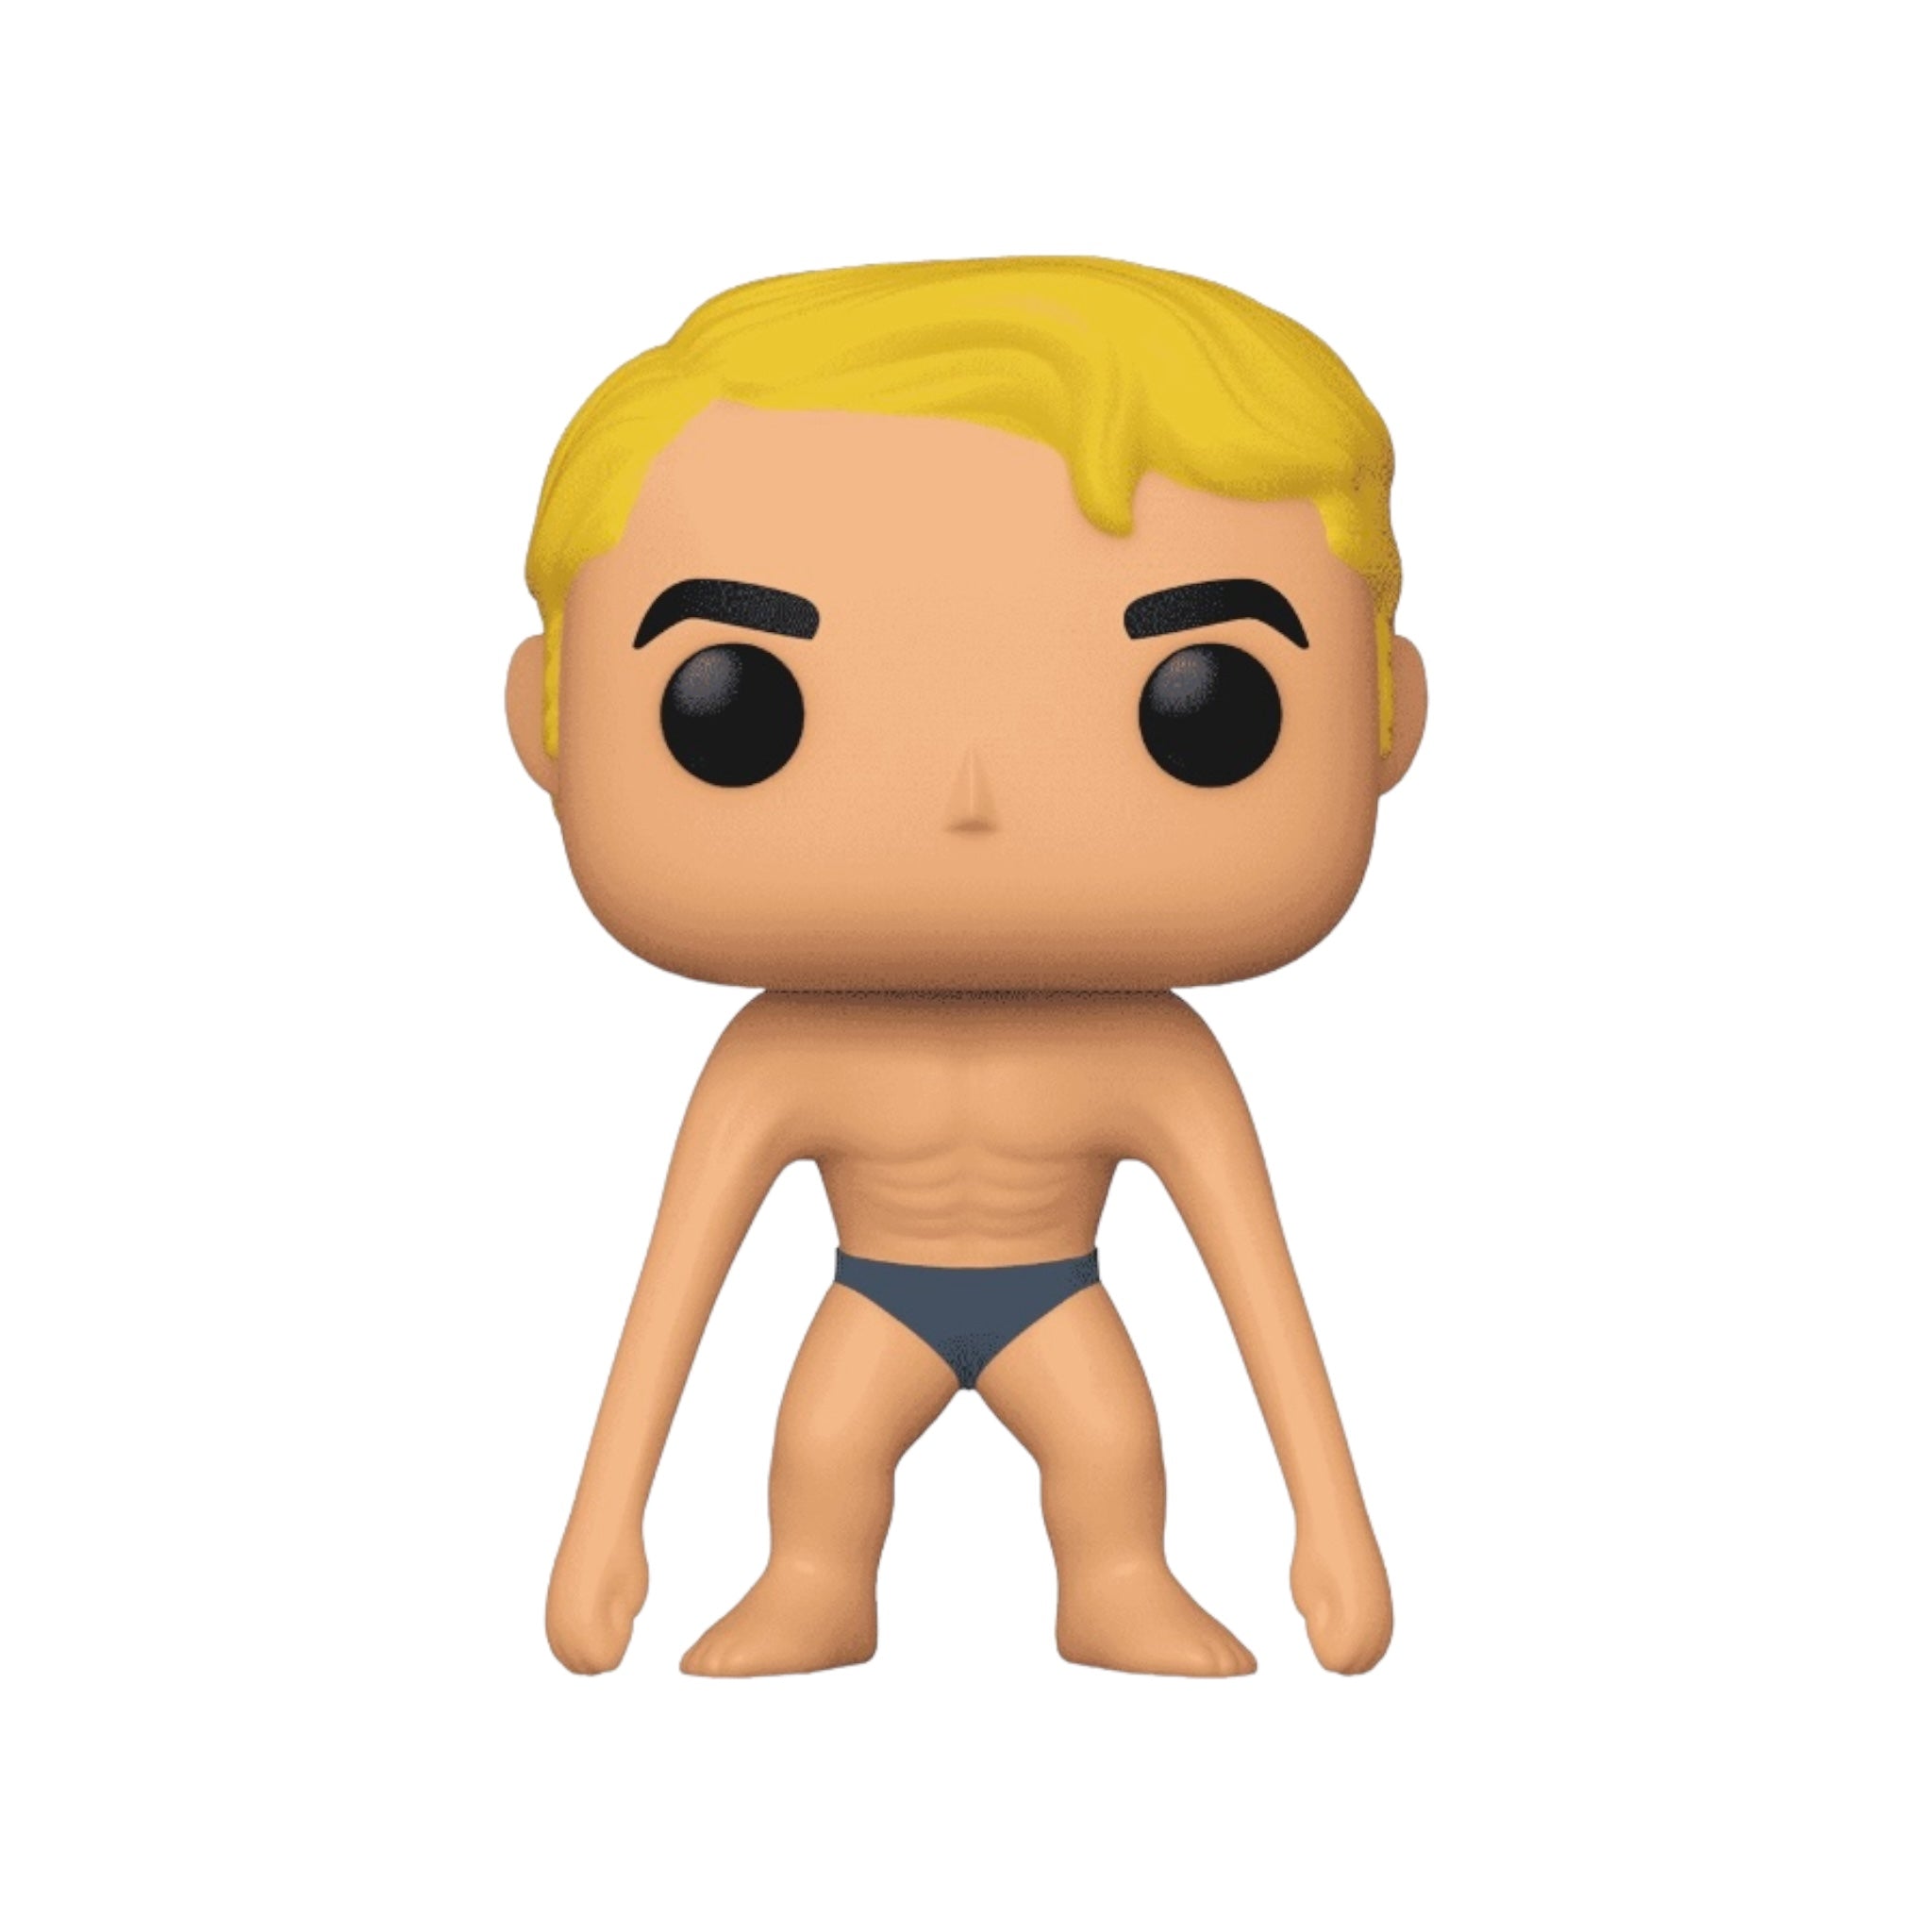 Stretch Armstrong #01 (Chase) Funko Pop! - Stretch Armstrong